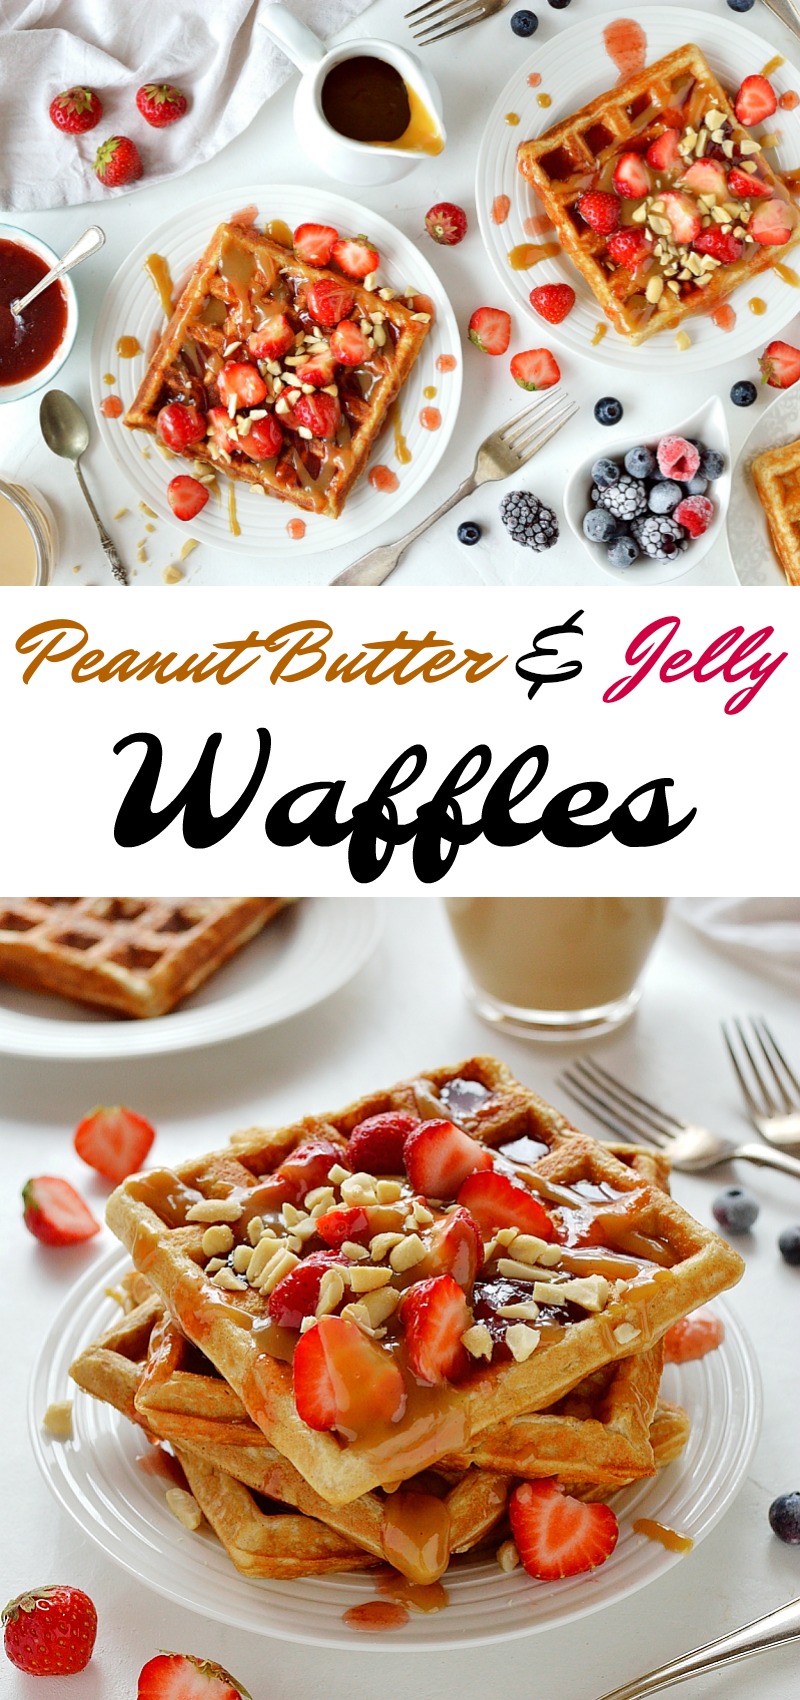 Peanut butter and jelly waffles - the classic sandwich combination in waffle form!